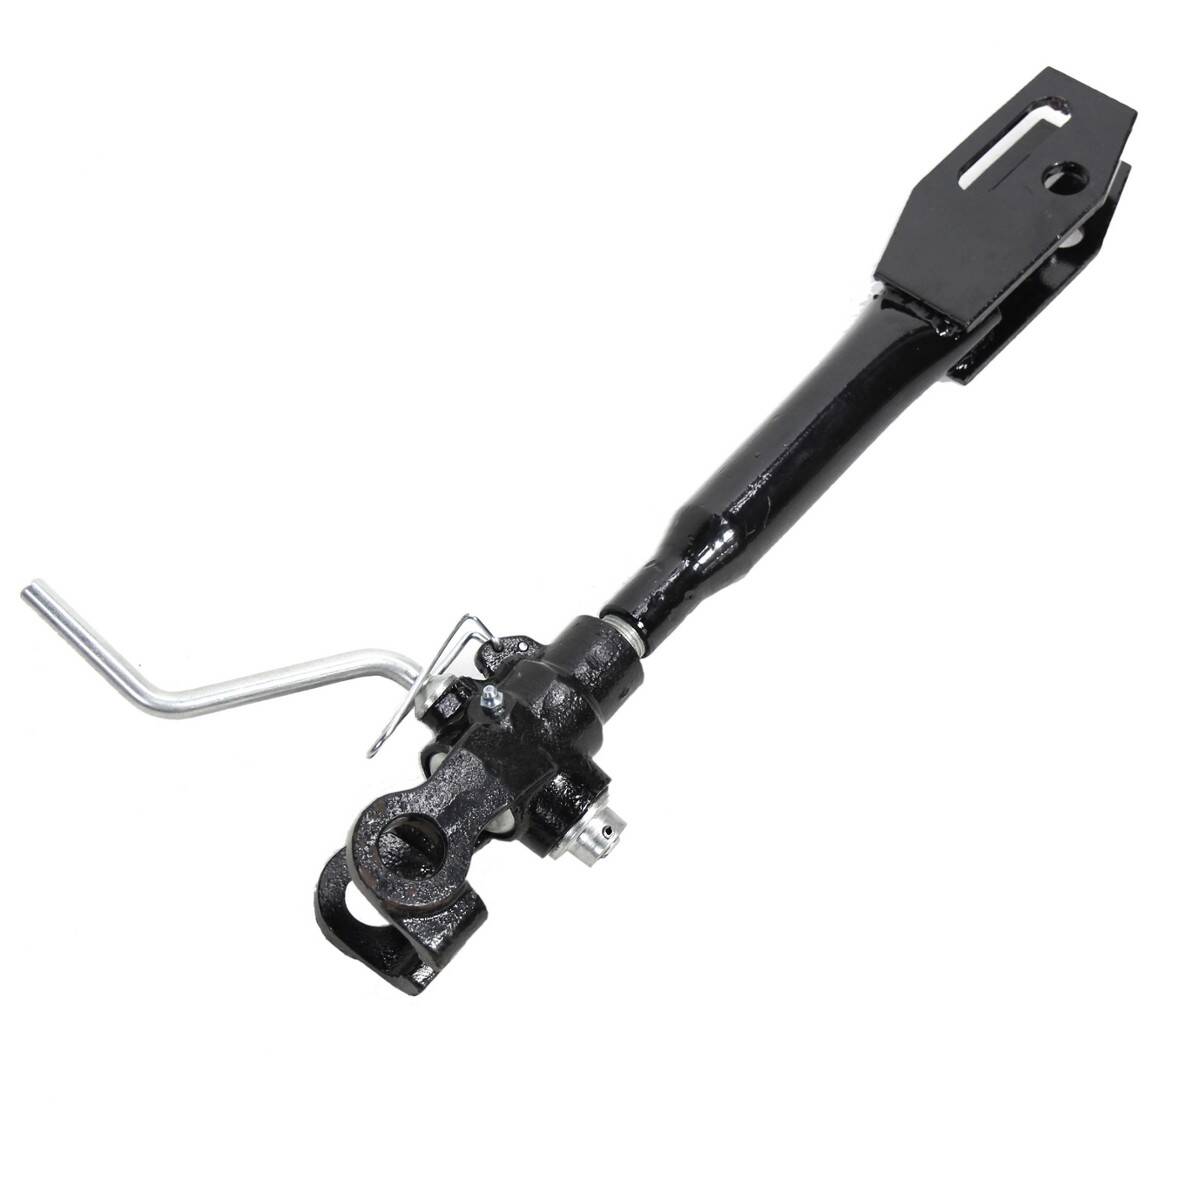 3 POINT HITCH ADJUSTABLE LEVELING ROD C360/3P